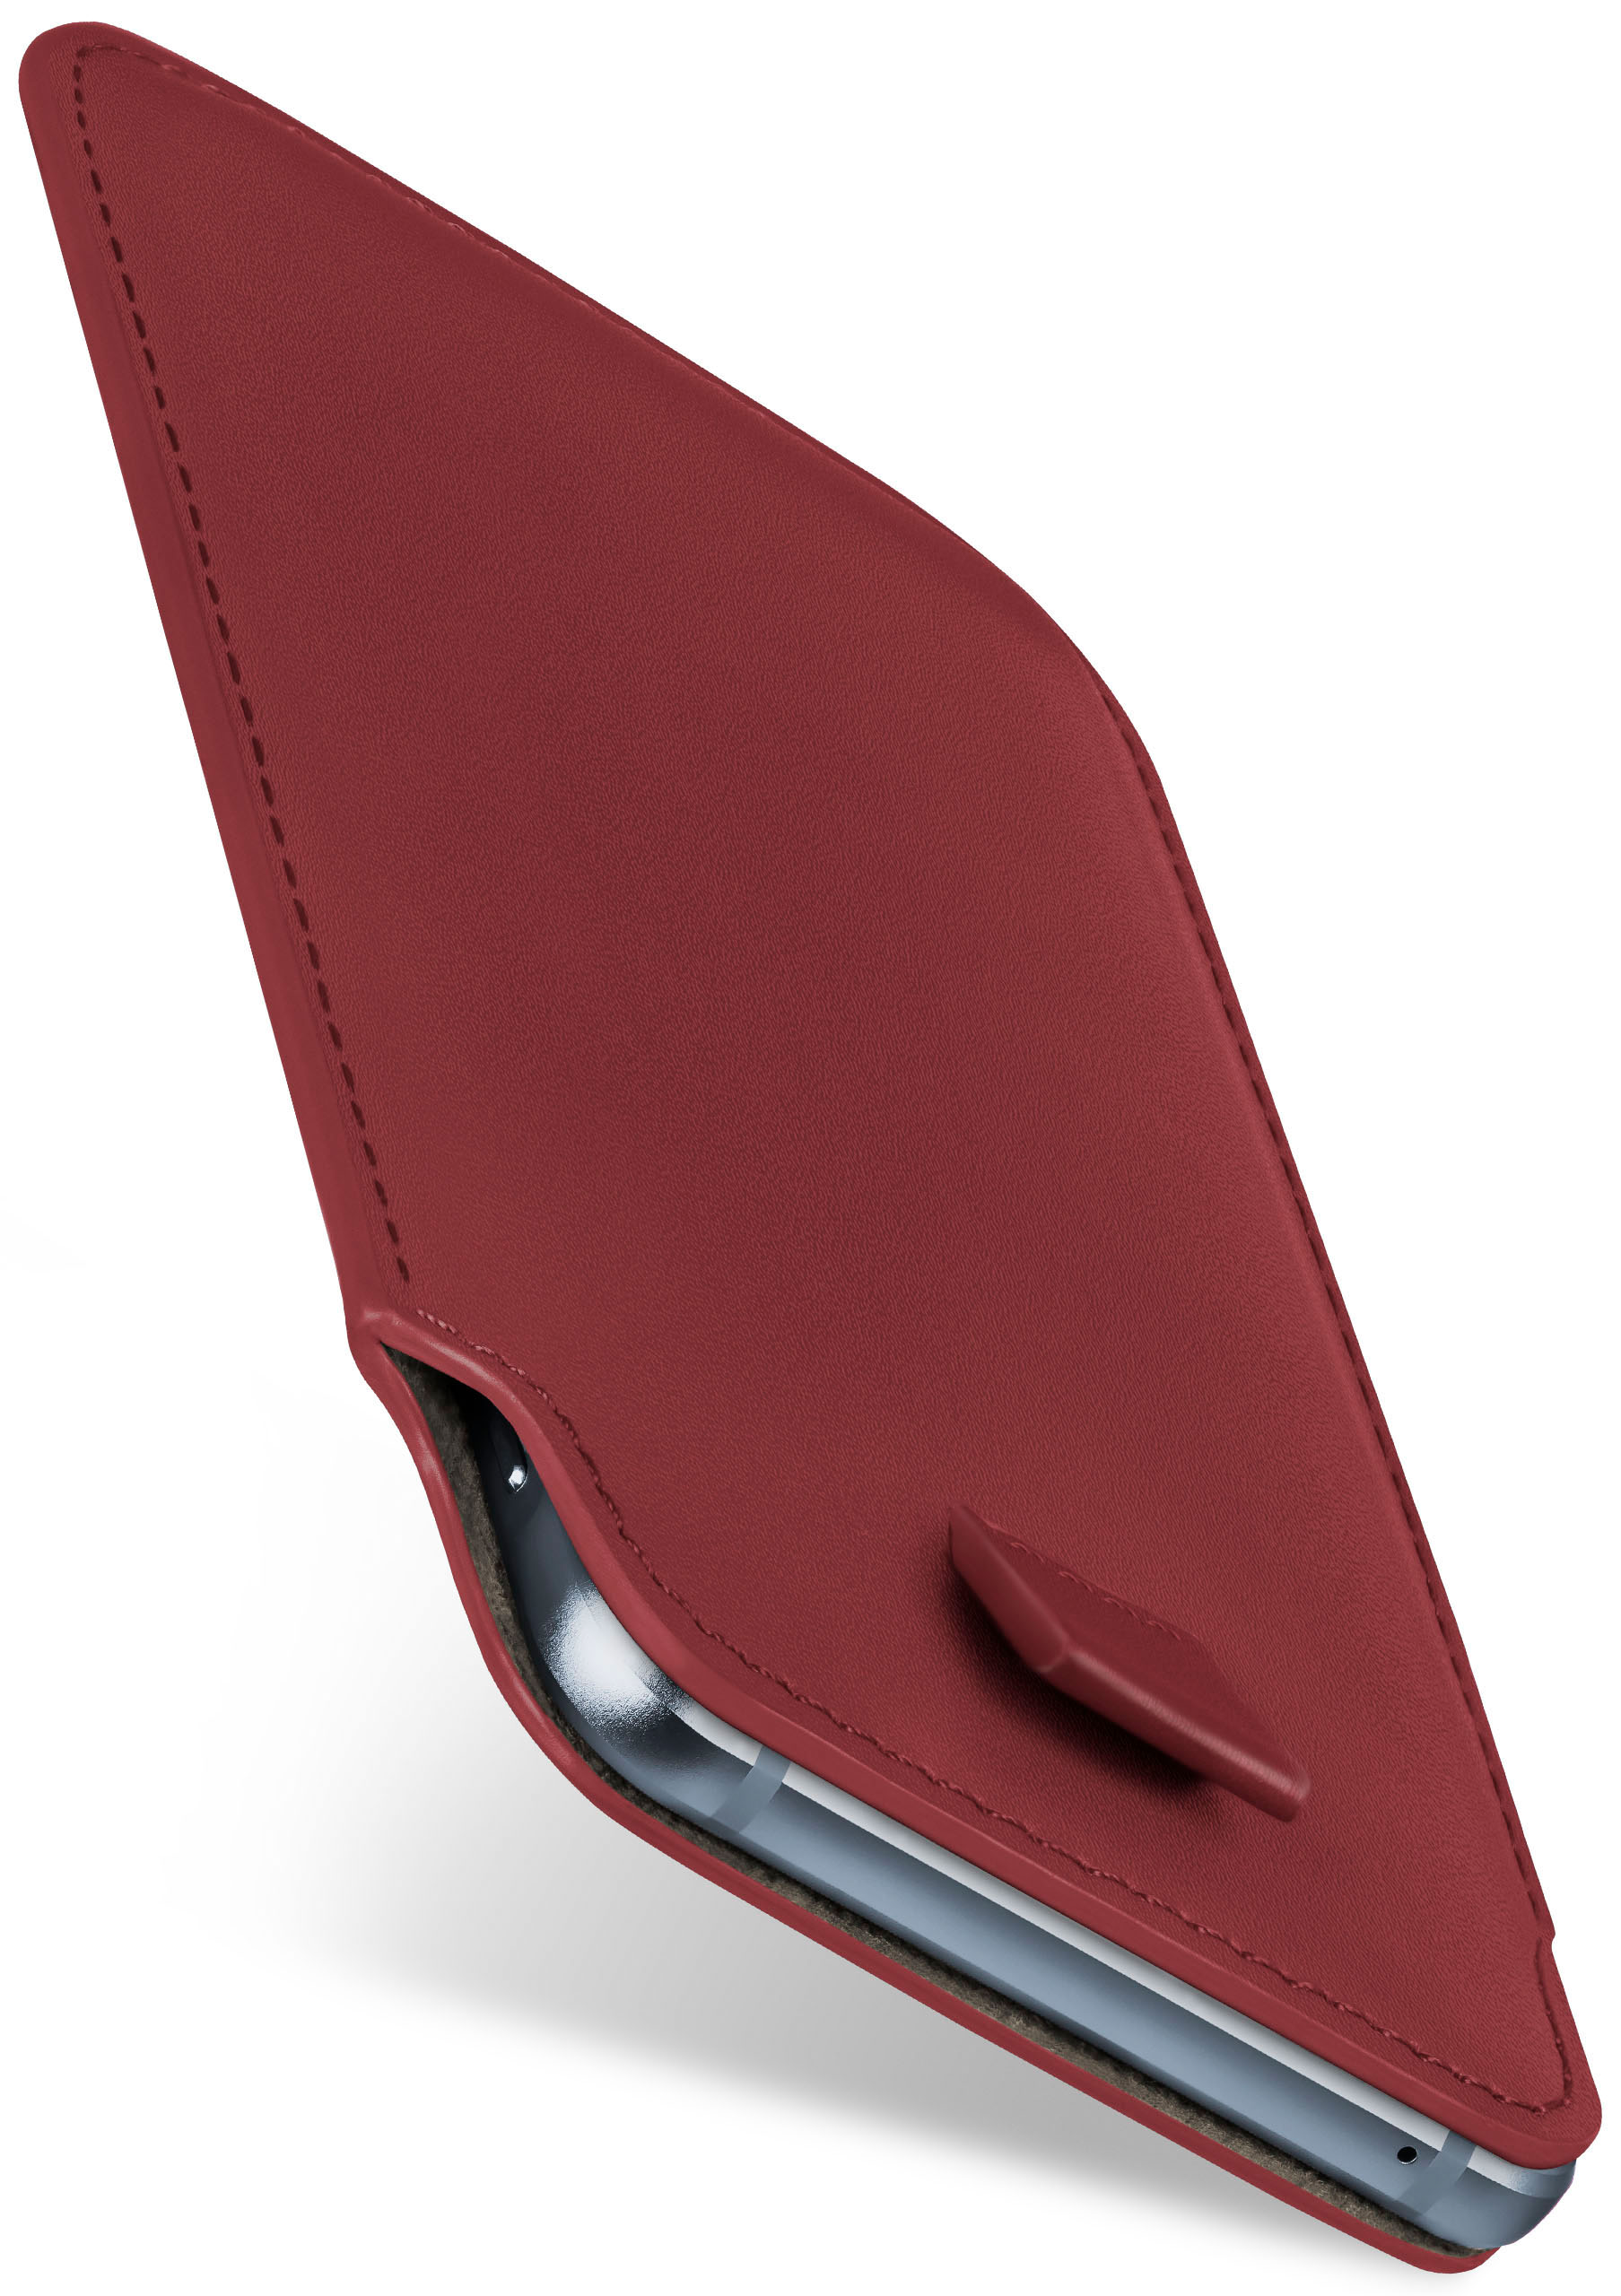 MOEX Slide Case, OnePlus, Cover, Maroon-Red 3T, Full